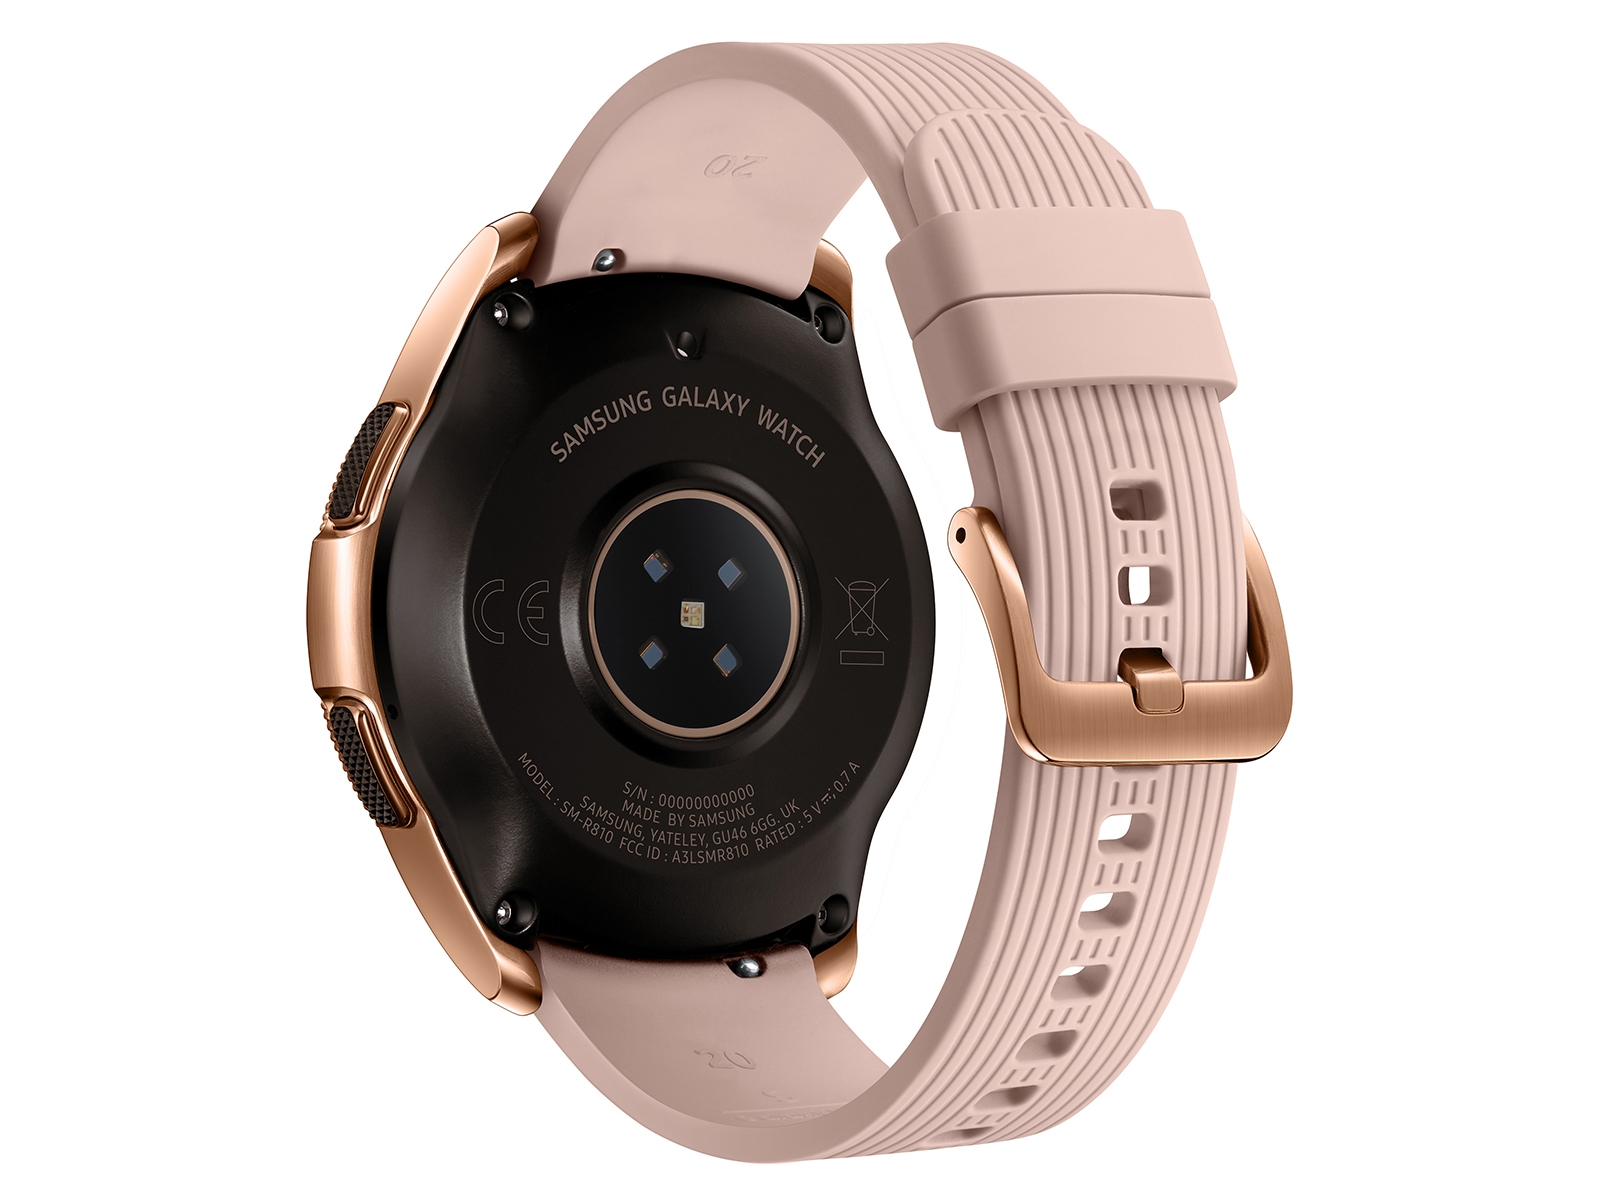 Samsung Watch 42mm Rose Gold Hotsell 52 Off Www Accede Web Com